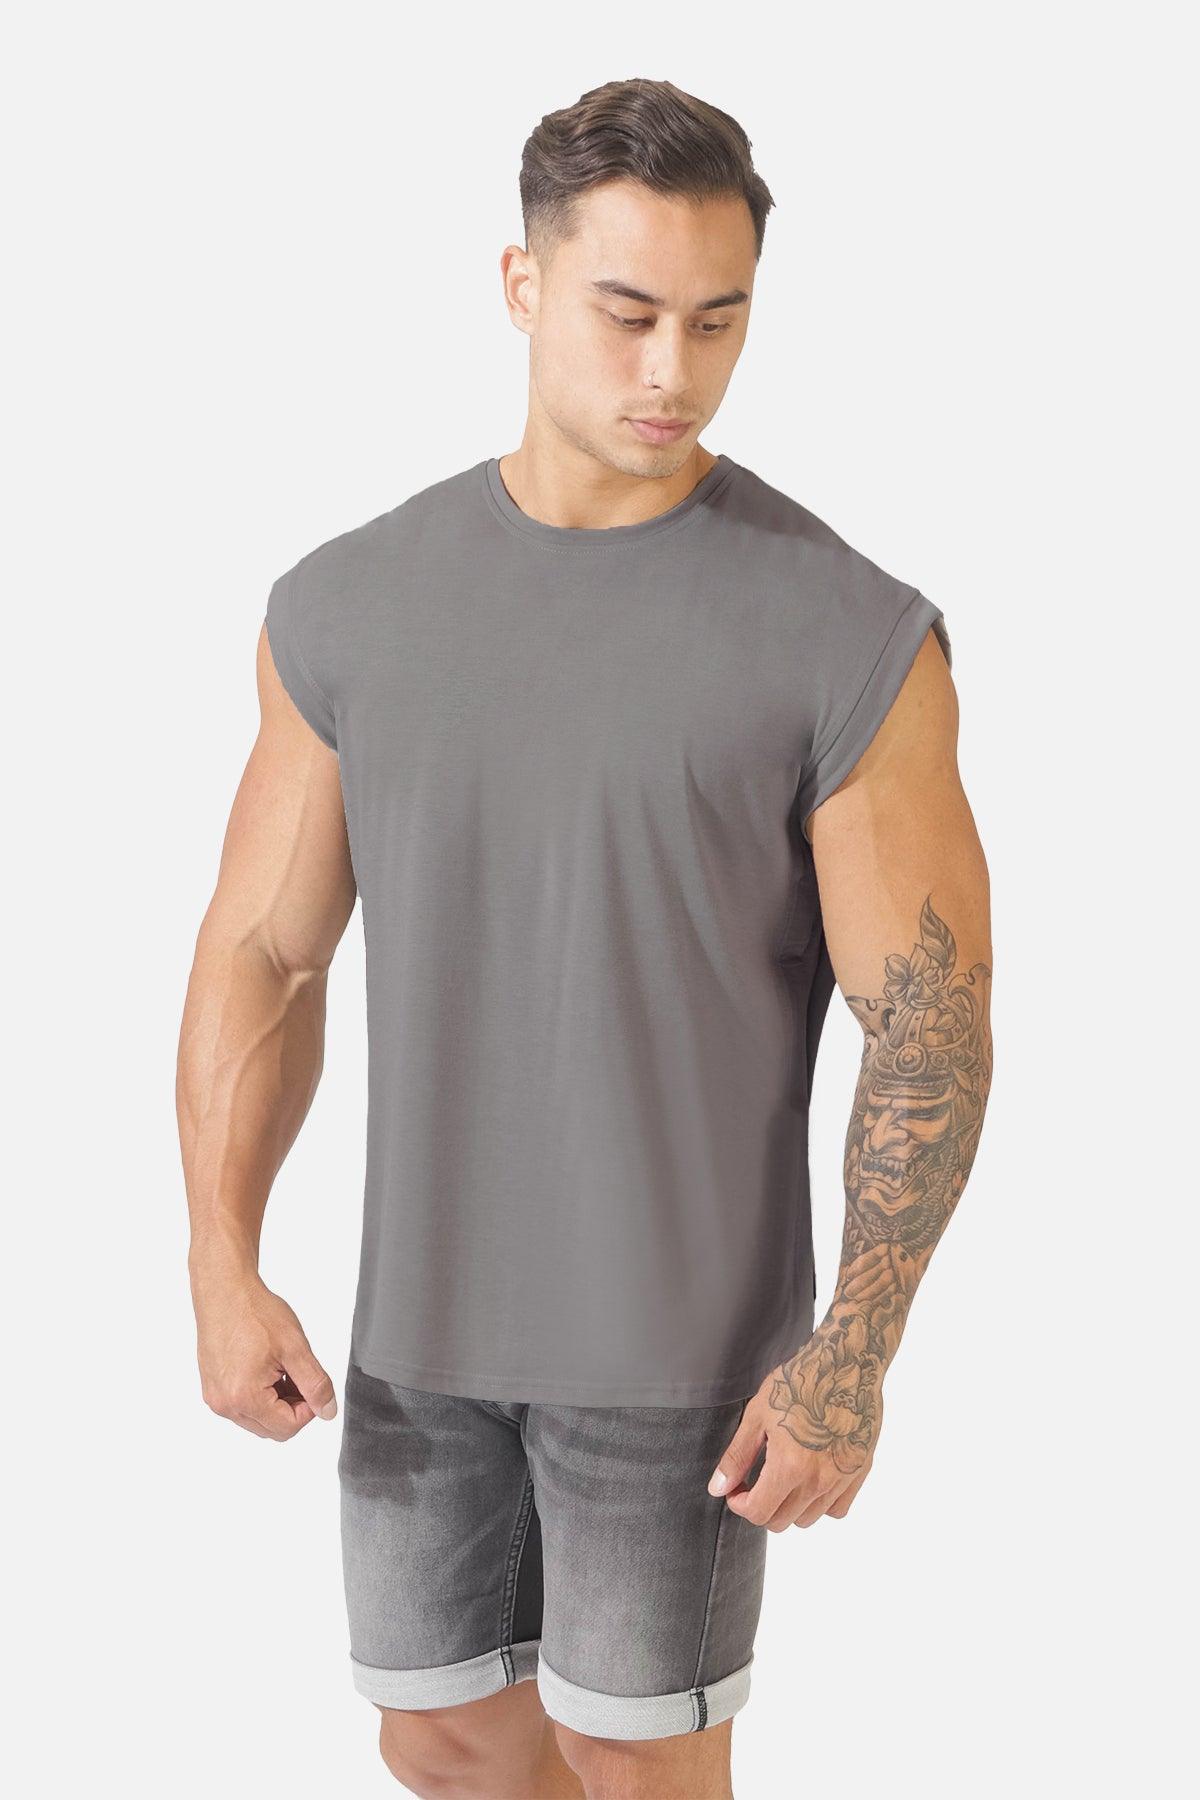 Capped Sleeve Muscle Tee - Light Gray - Jed North